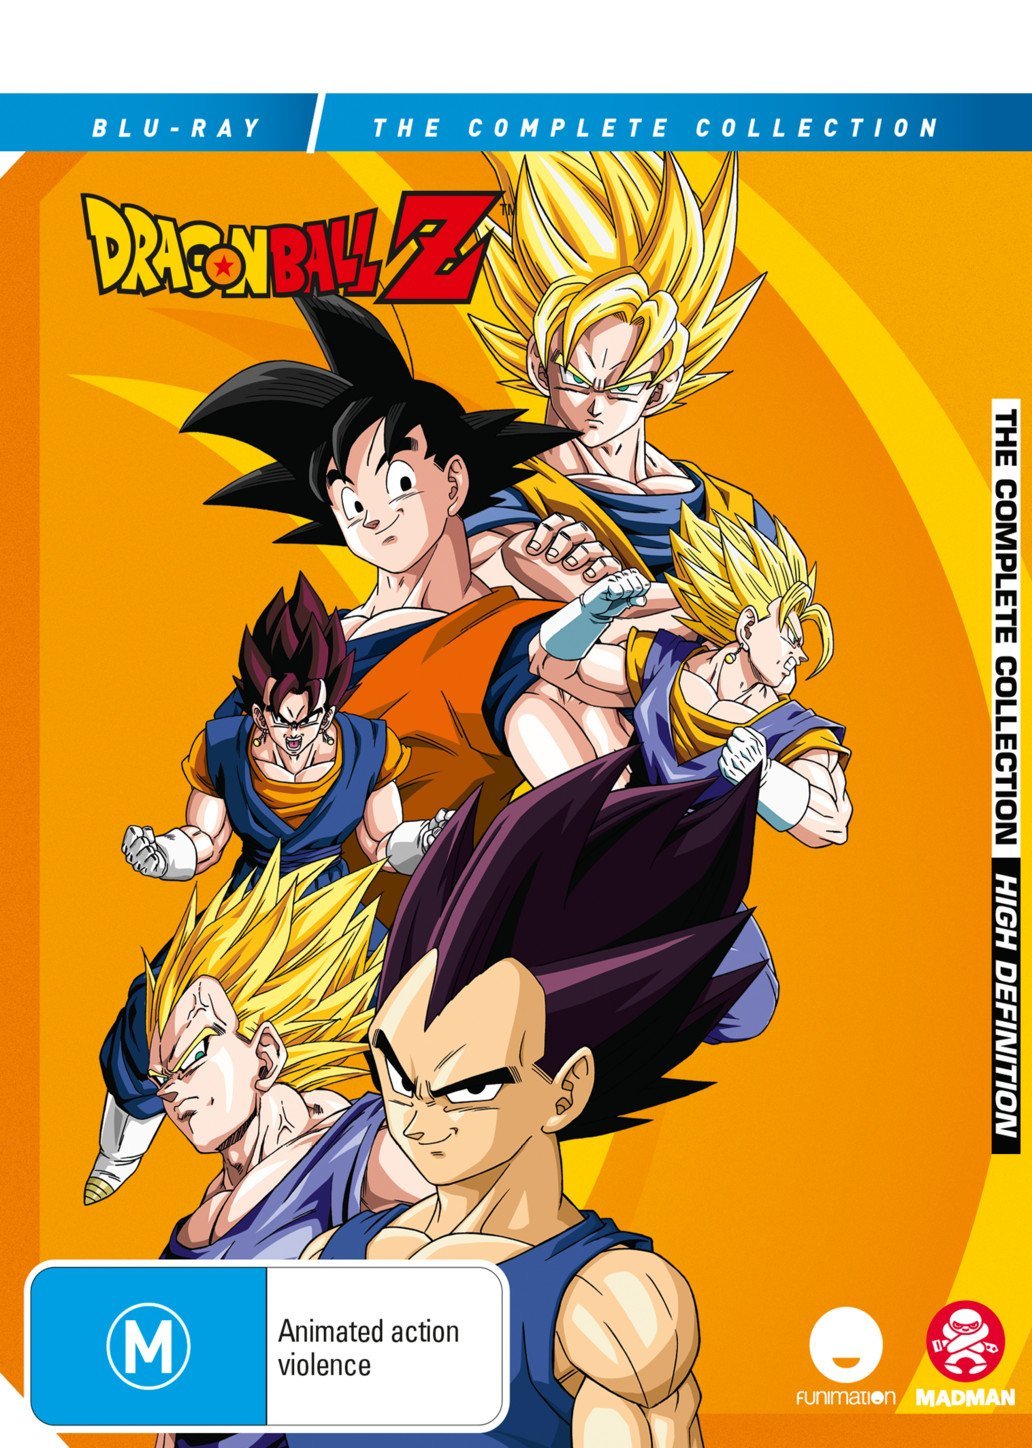 Dragon Ball Z Anime (Blu-Ray) (DBZ) Complete Collection